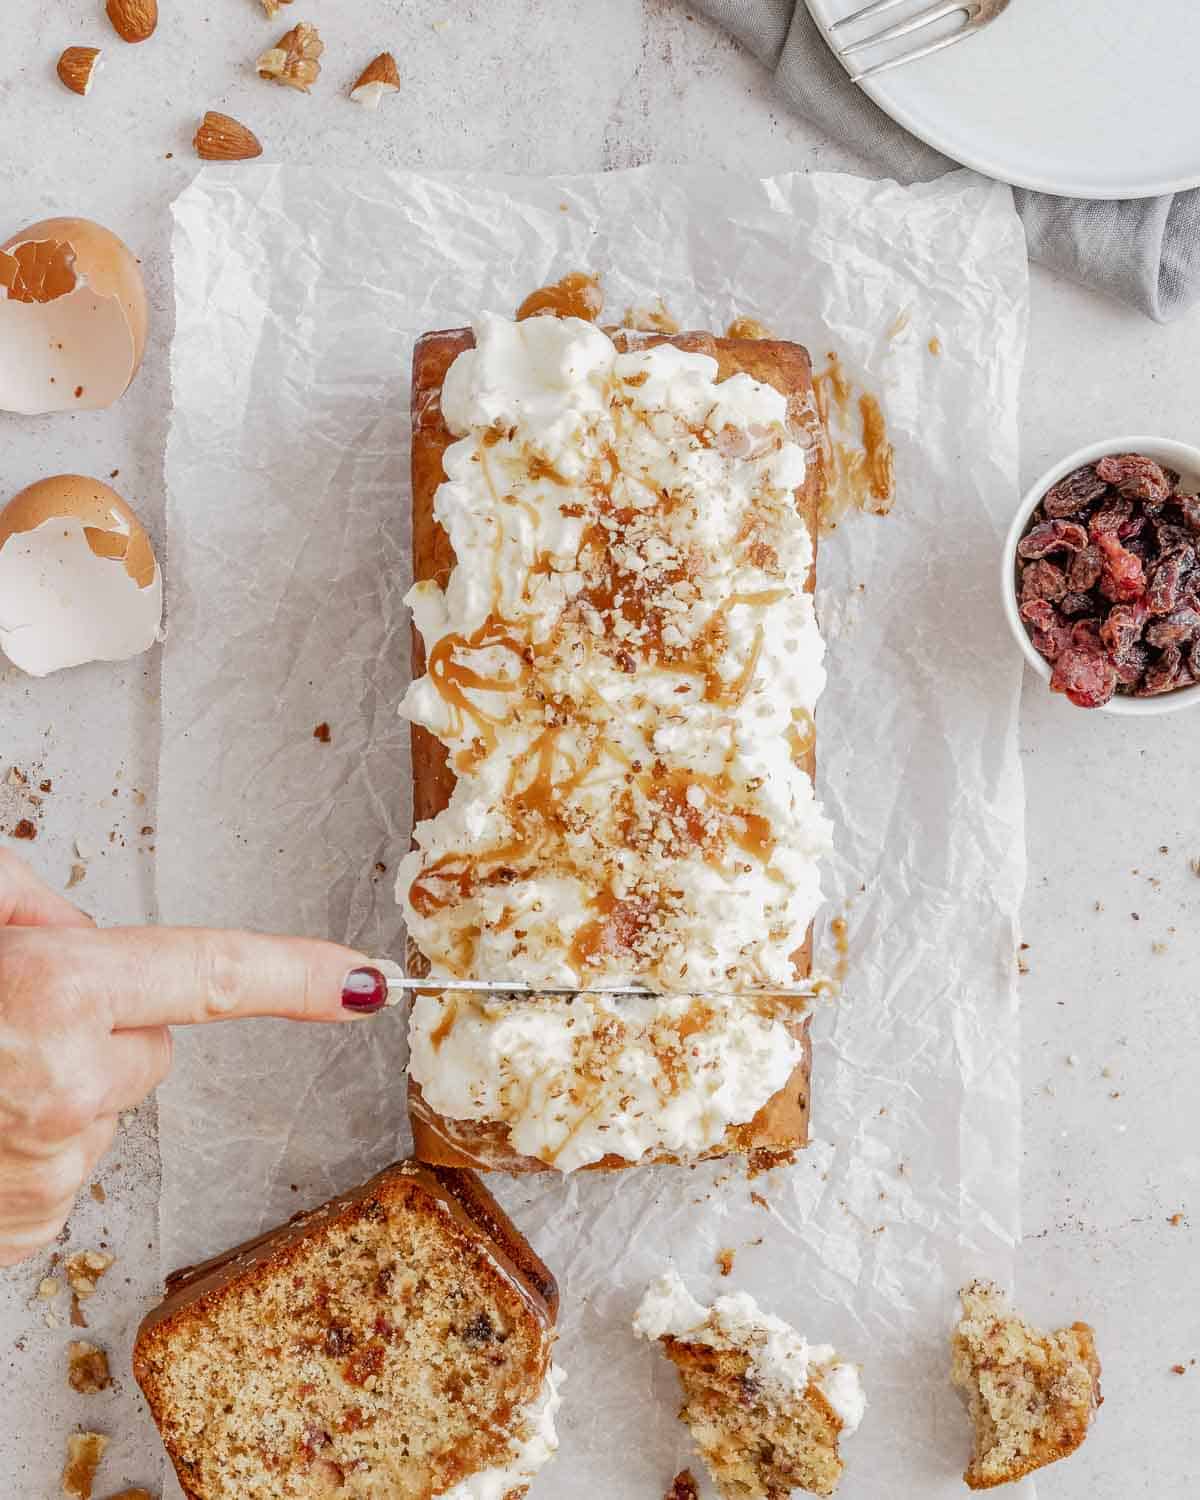 someone-is-slicing-a-Dried Fruits Loaf with Walnuts and Almonds-on-light-white-table-with-parchment-paper-the-loaf-has-fresh-whipped-cream-and-caramel-on-top- it-is-sliced-showing-the-dired-fruits-inside